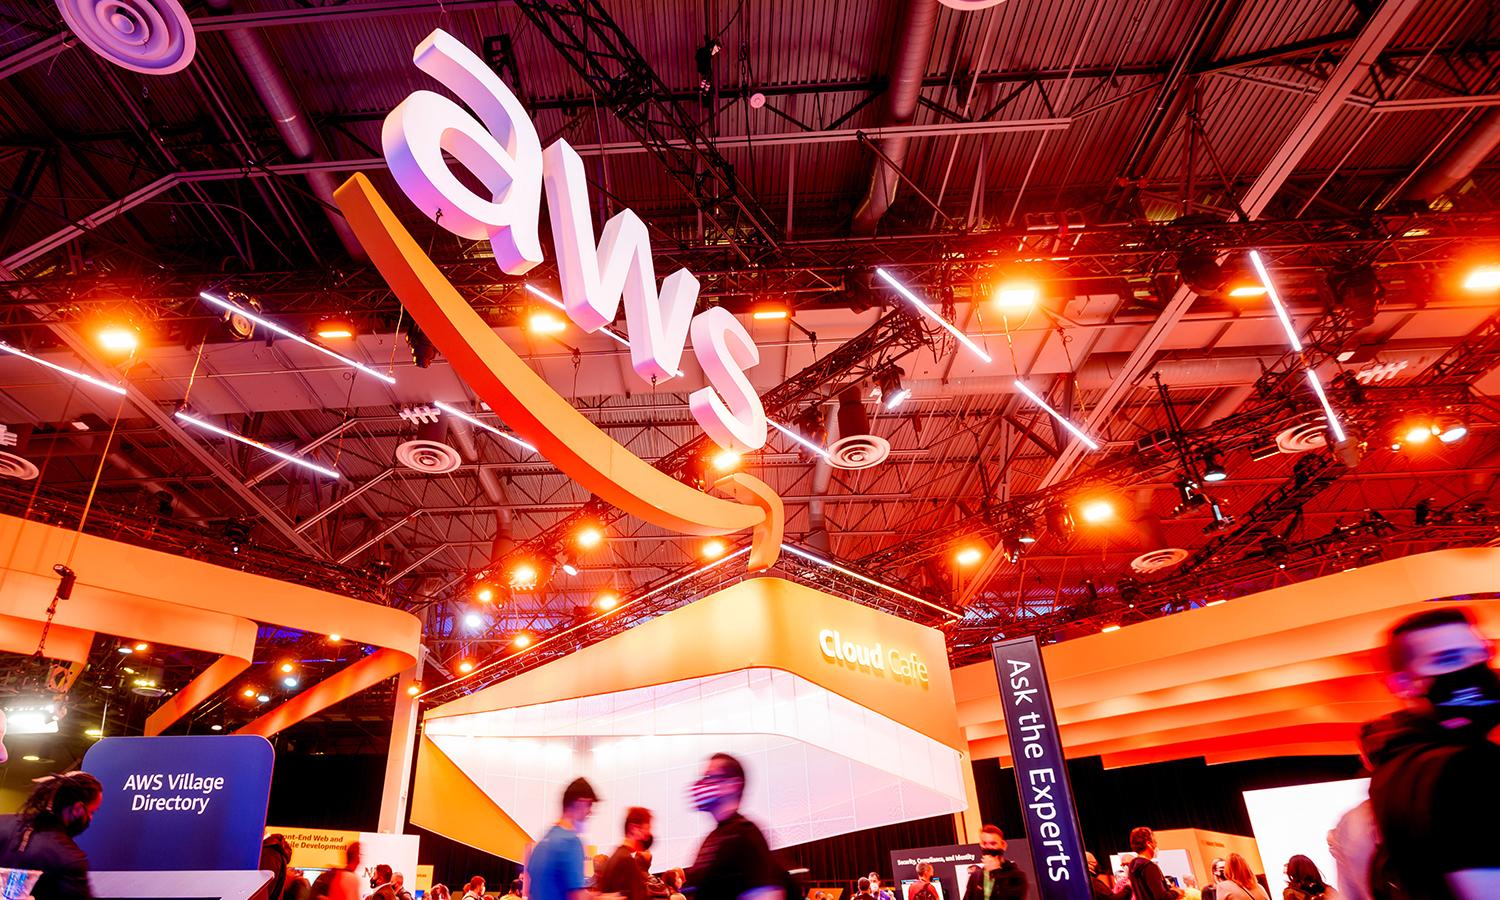 A logo for AWS is suspended over a convention room with attendees walking below.